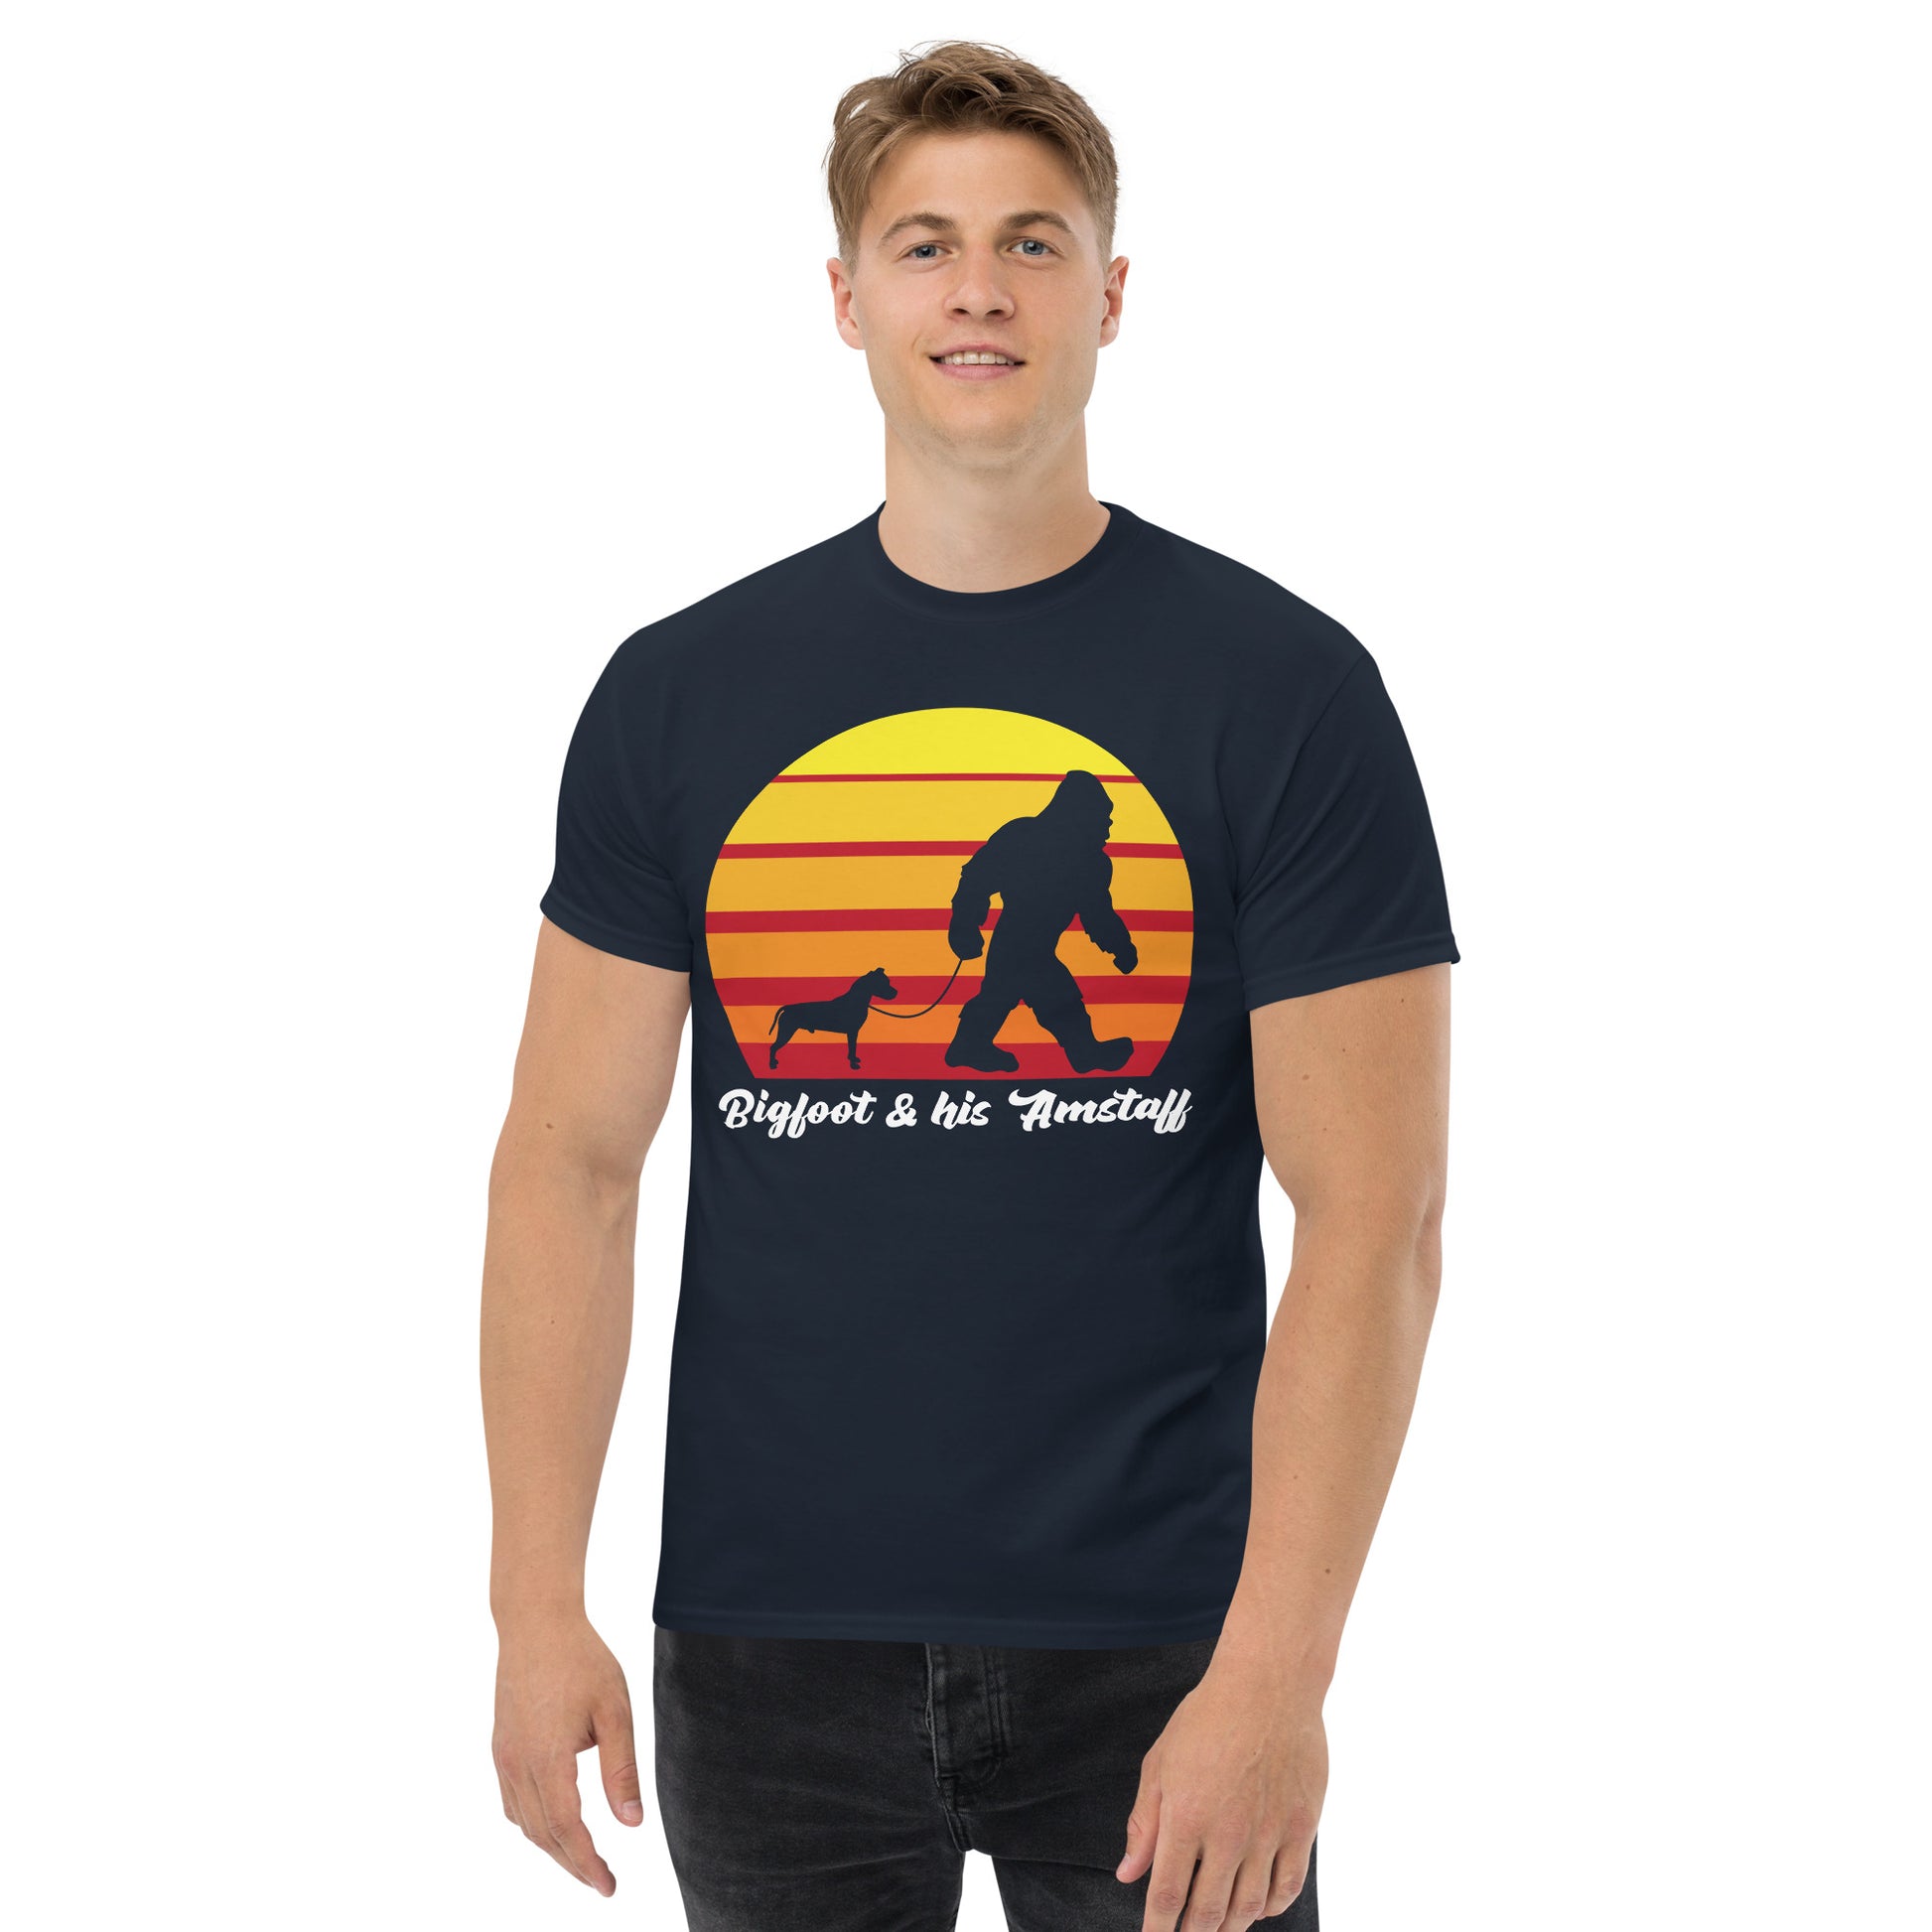 Big foot and his Amstaff men’s navy t-shirt by Dog Artistry. American Staffordshire t-shirt.